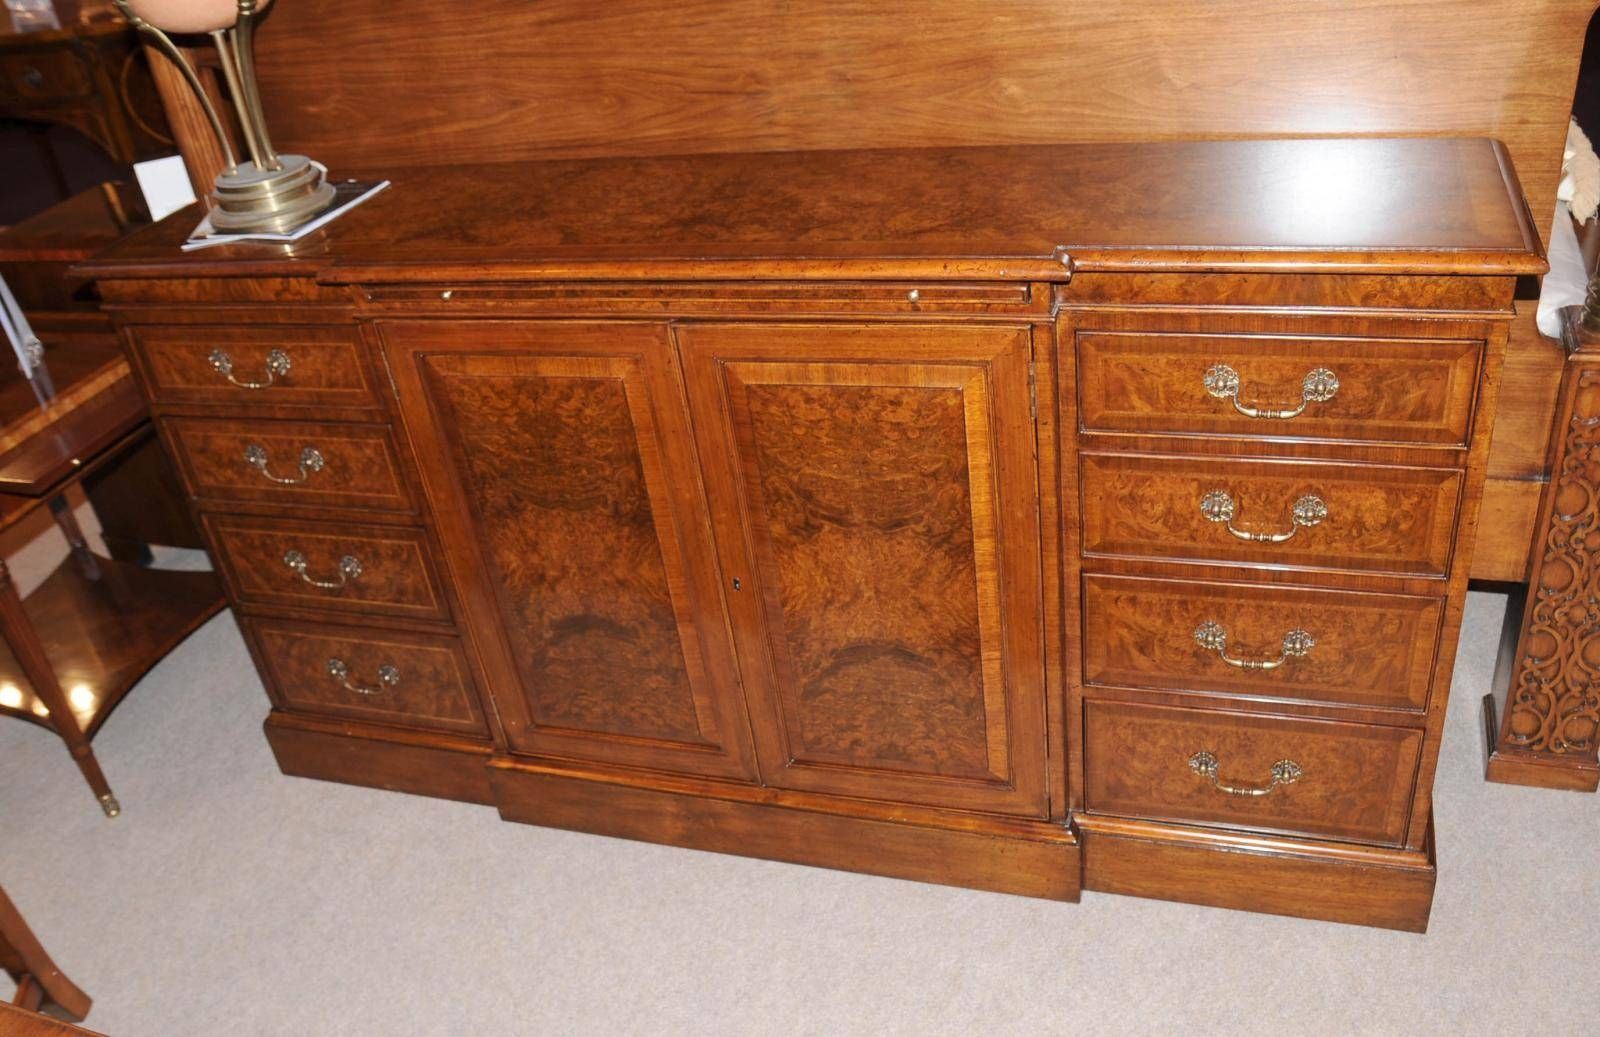 Edwardian Walnut Sideboard Buffet Server Dining Furniture | Ebay In Dining Room Servers And Sideboards (View 13 of 15)